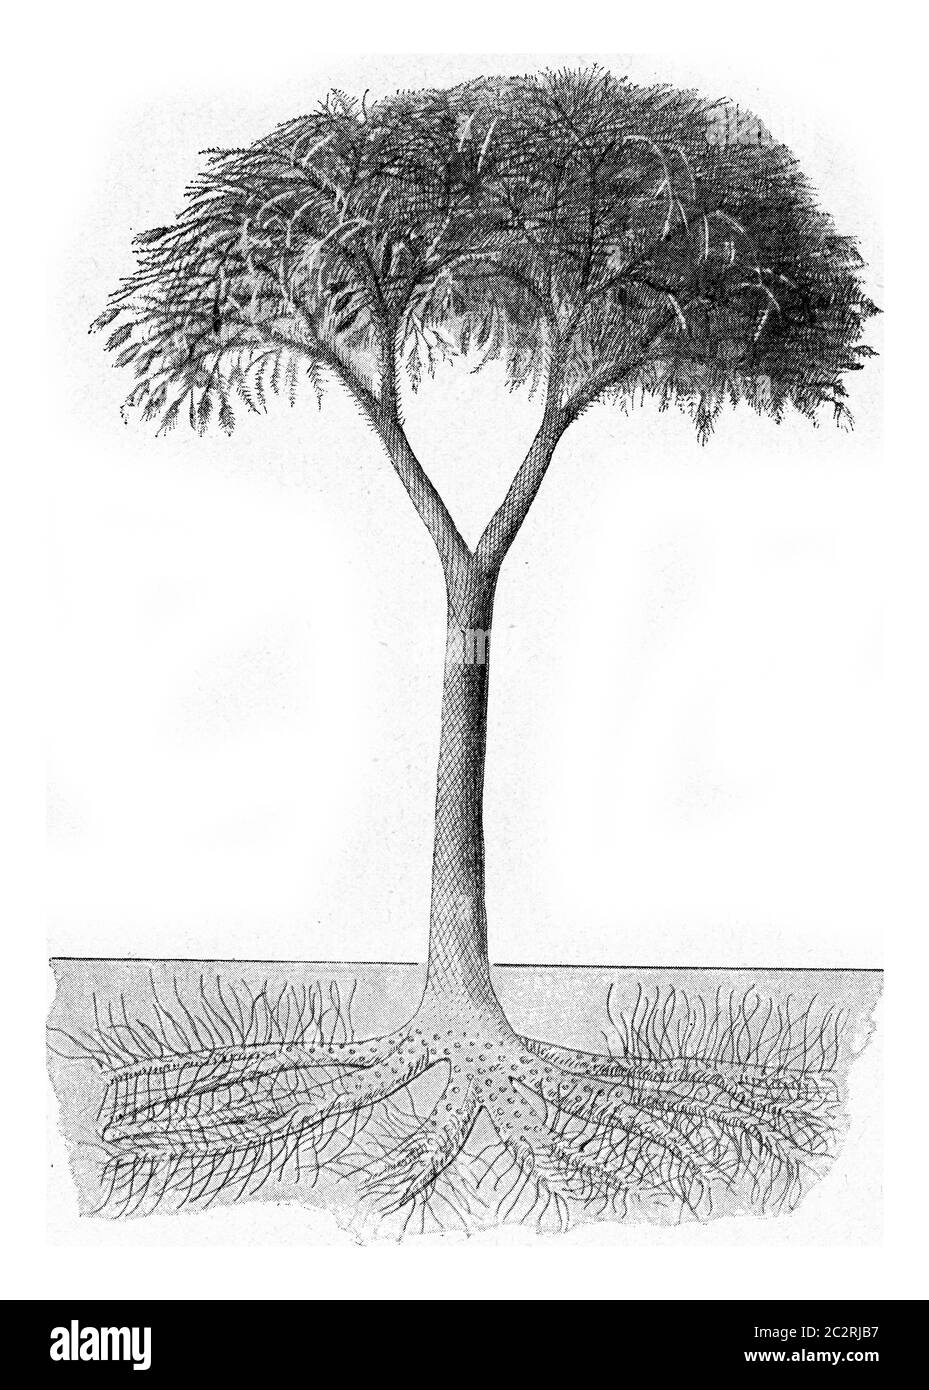 Lepidodendron with cone-shaped flowers at the ends of branches, vintage engraved illustration. From the Universe and Humanity, 1910. Stock Photo